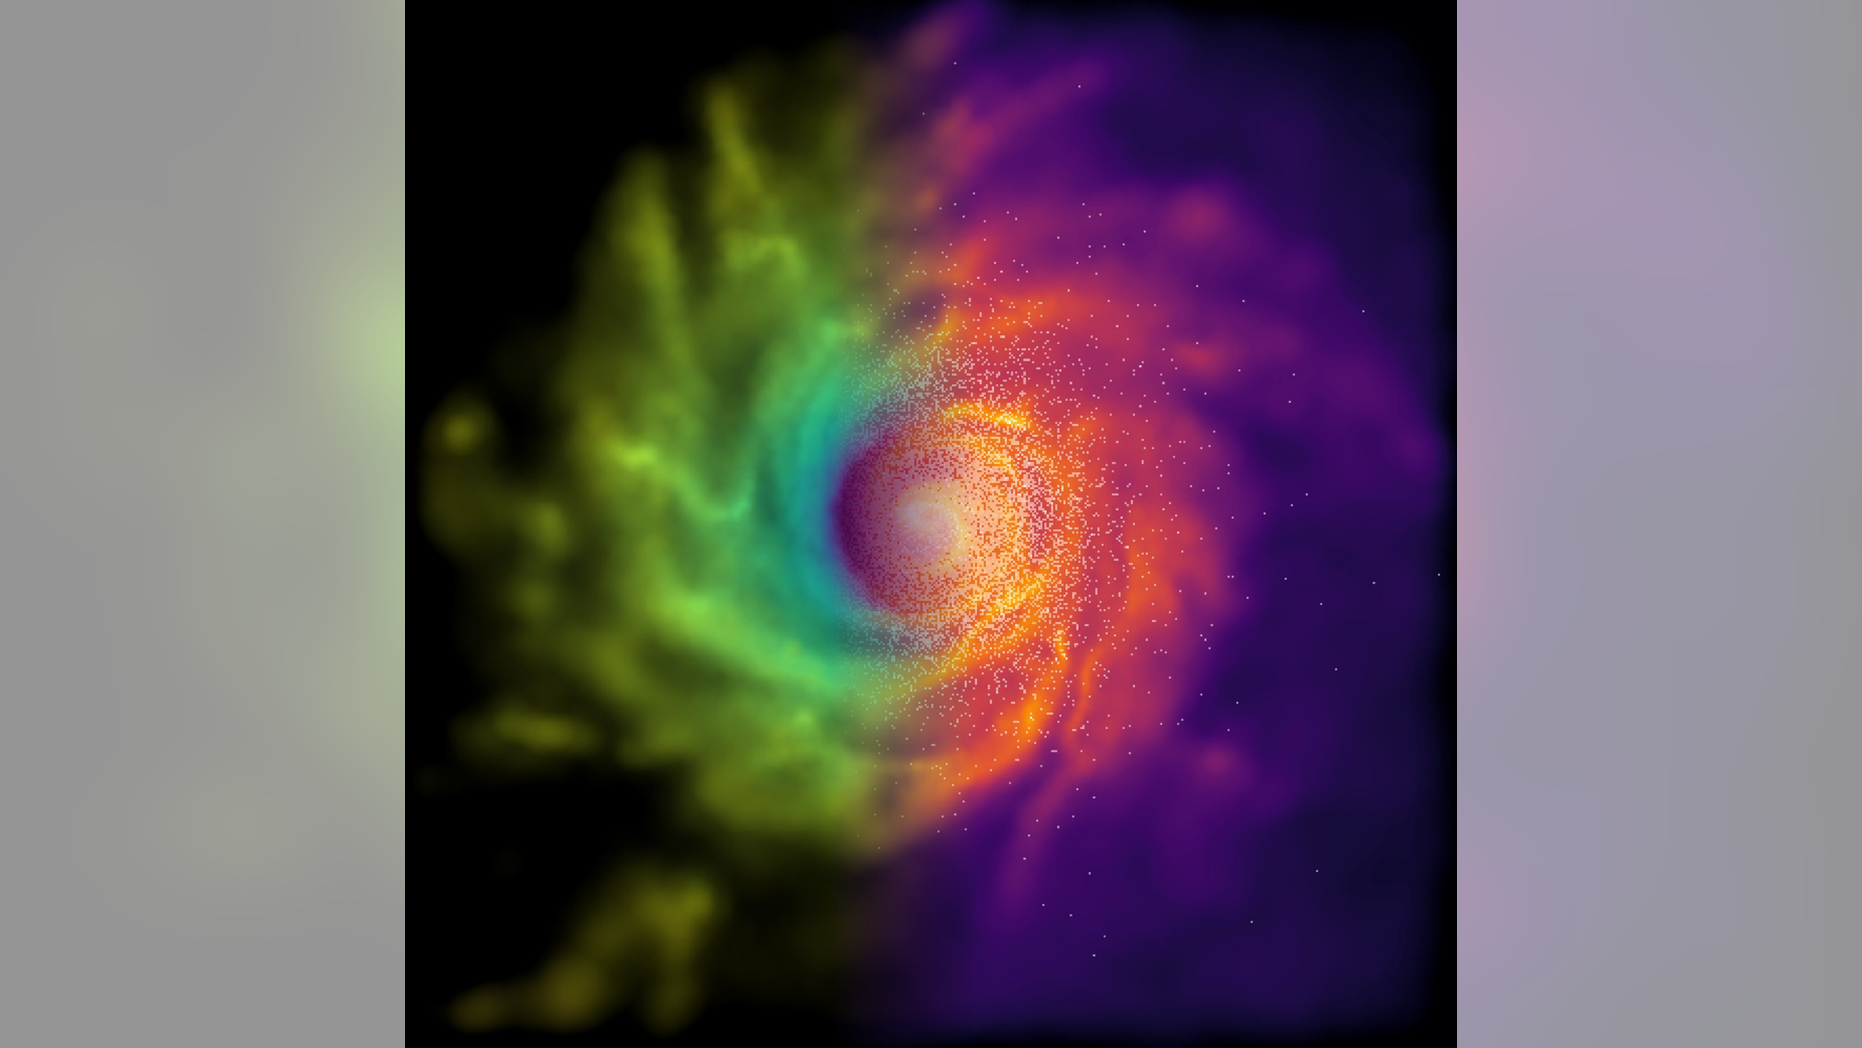 The simulated galaxy visualized from above, the dark central regions corresponding to the standard forces and the bright yellow regions corresponding to the modified forces.